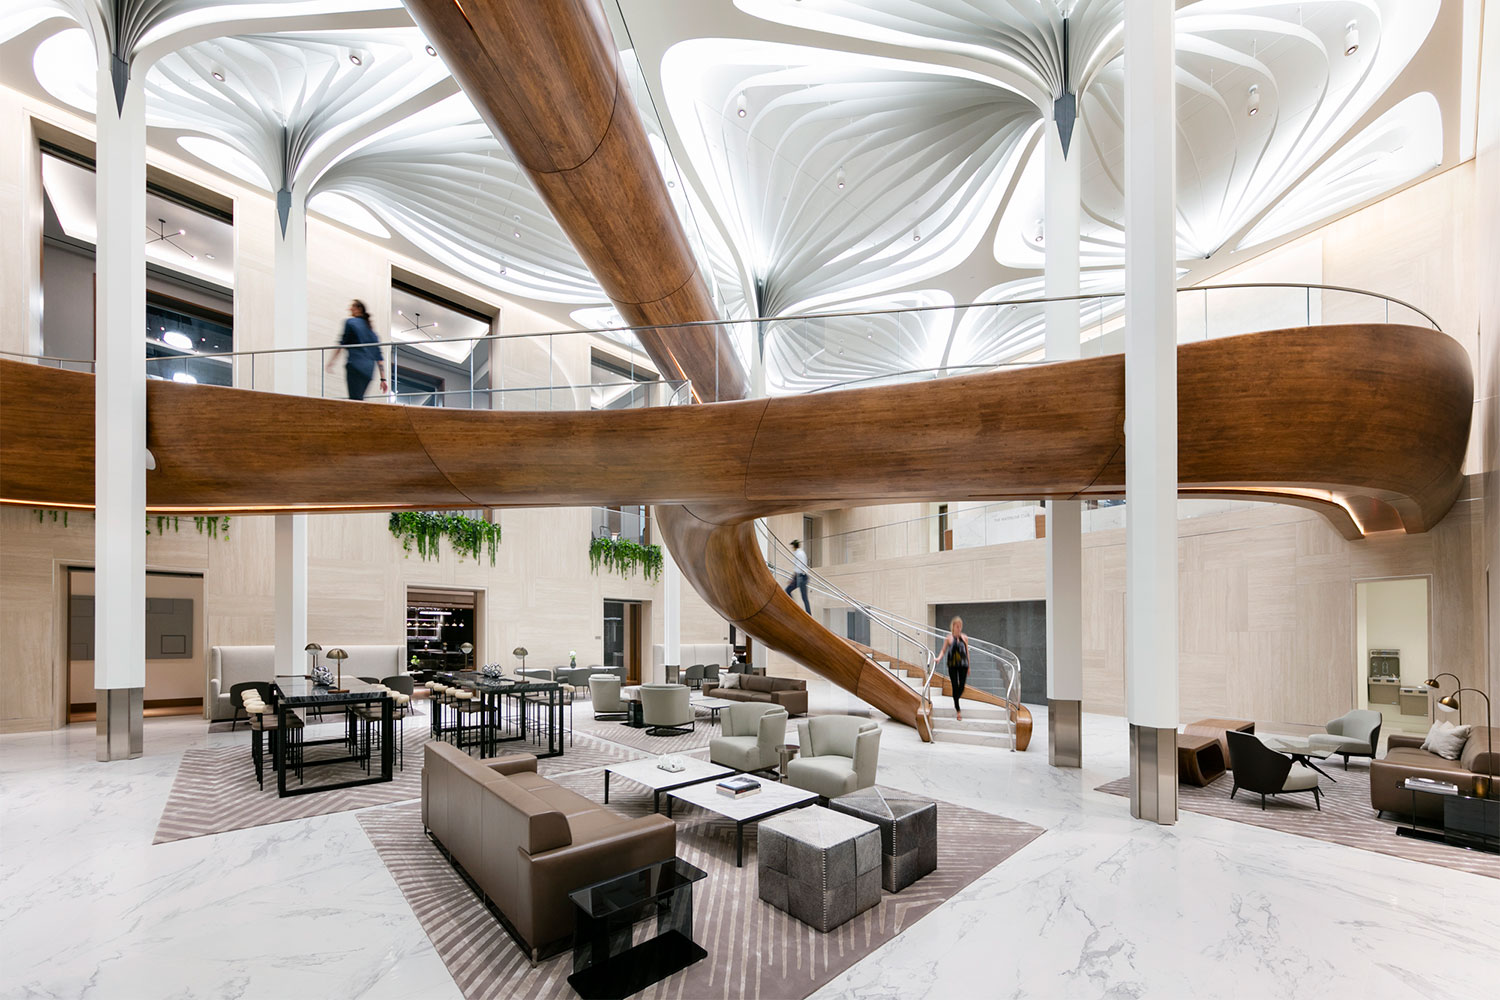 A photograph of the interior of the Waterline Club featuring a dramatic sculptural ceiling